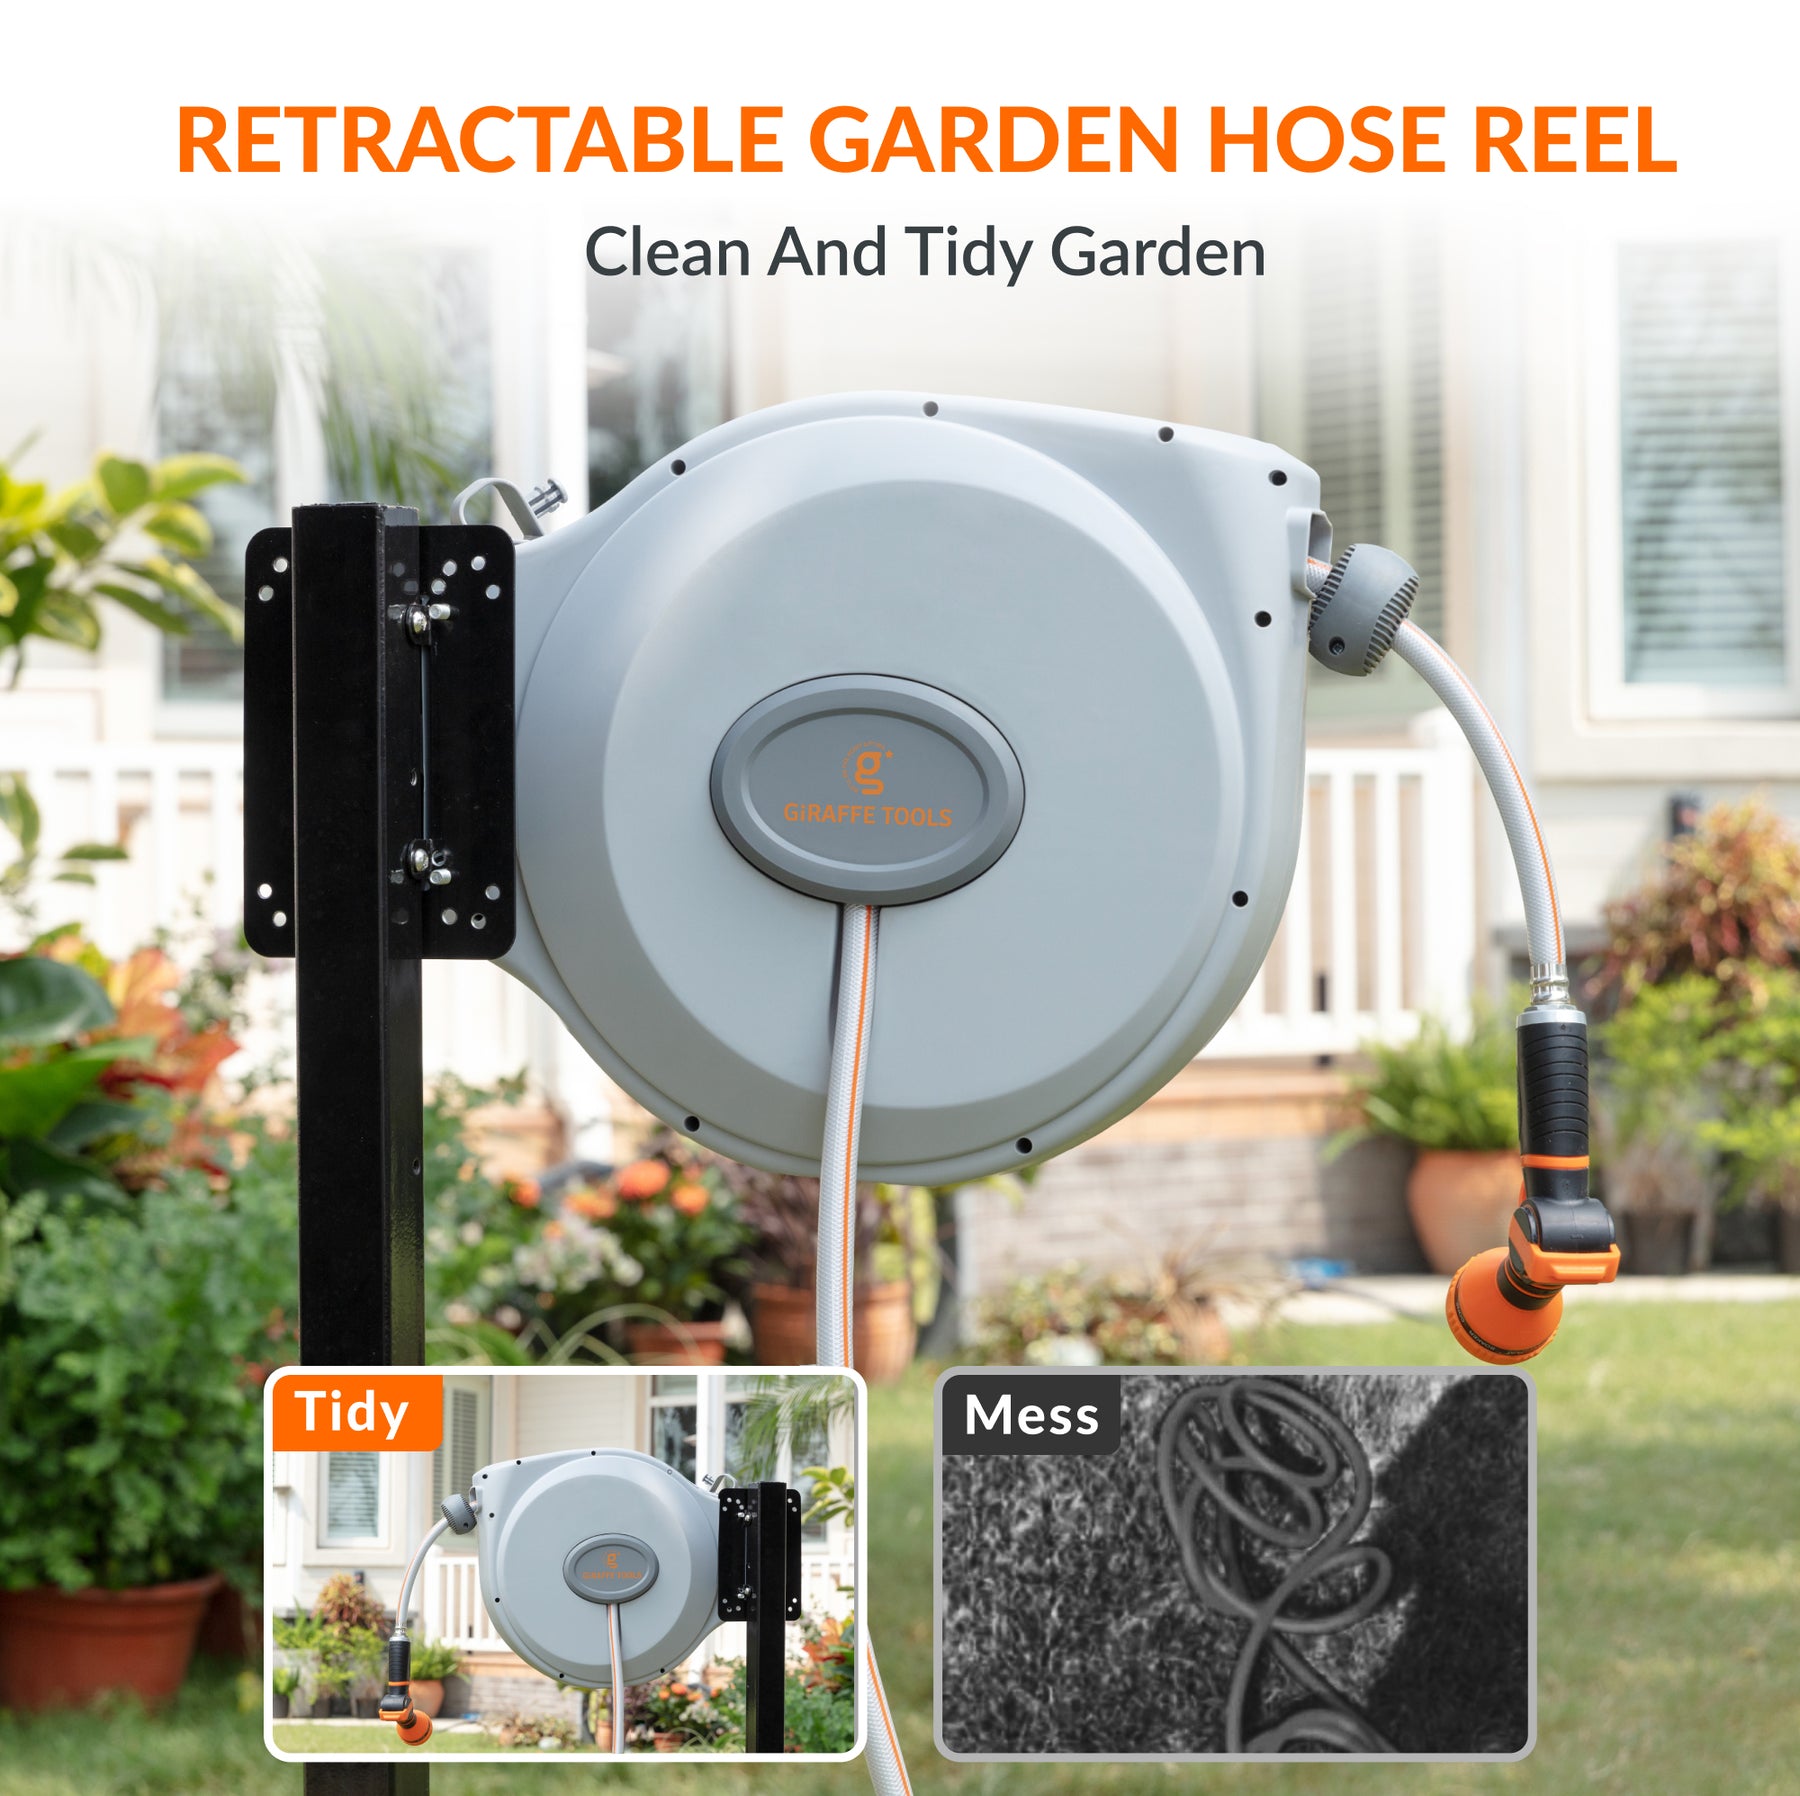  Giraffe Tools Hybrid Water Hose with Shut Off Valve 5/8 in. x 100  ft and Garden Hose Reel Cart with Wheels Bundle : Patio, Lawn & Garden